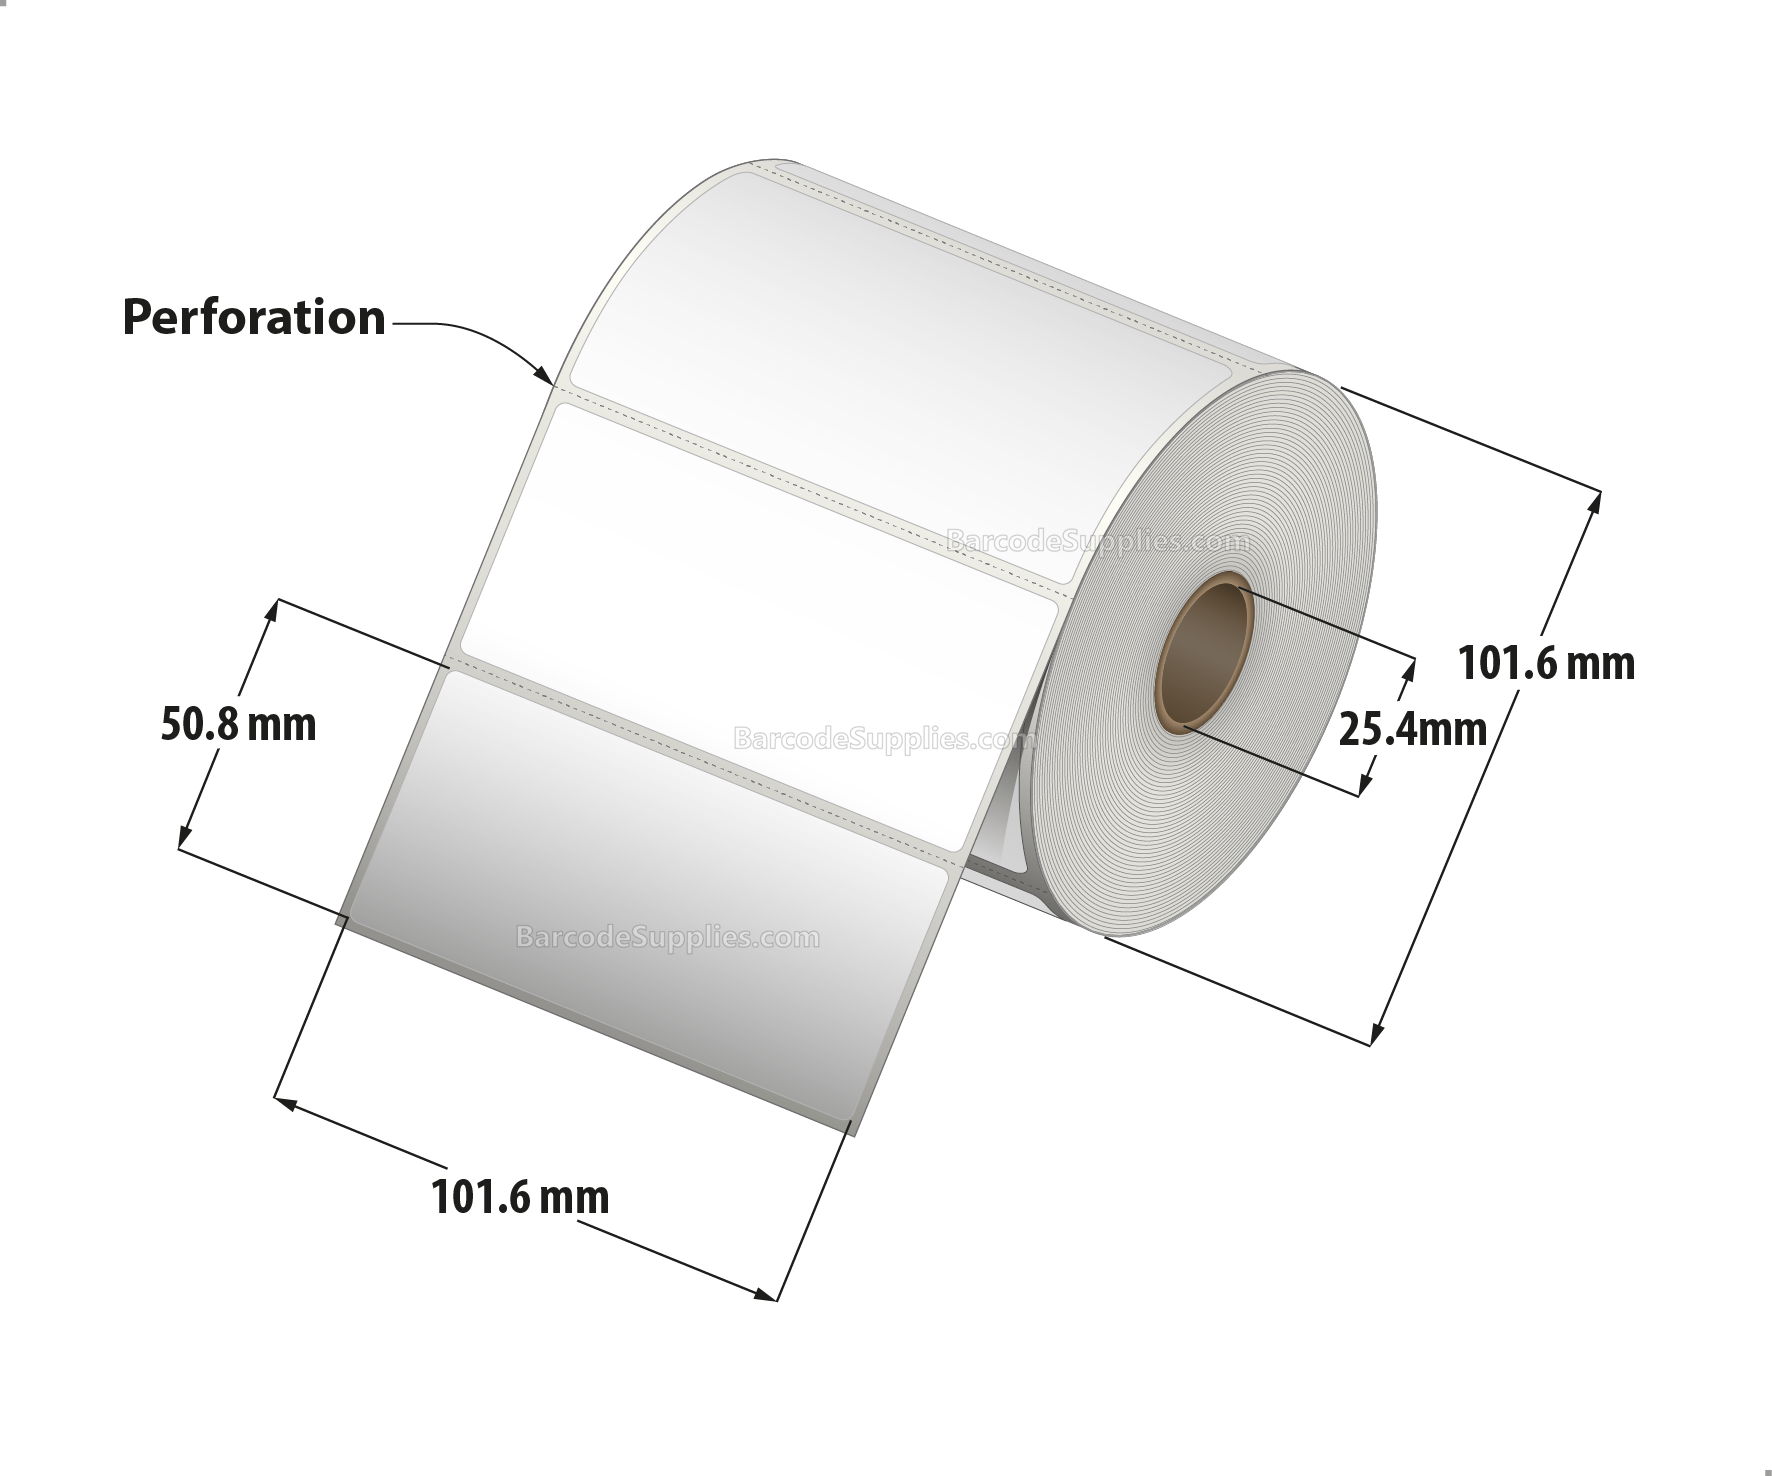 4 x 2 Direct Thermal White Labels With Rubber Adhesive - Perforated - 735 Labels Per Roll - Carton Of 12 Rolls - 8820 Labels Total - MPN: RDT4-400200-1P